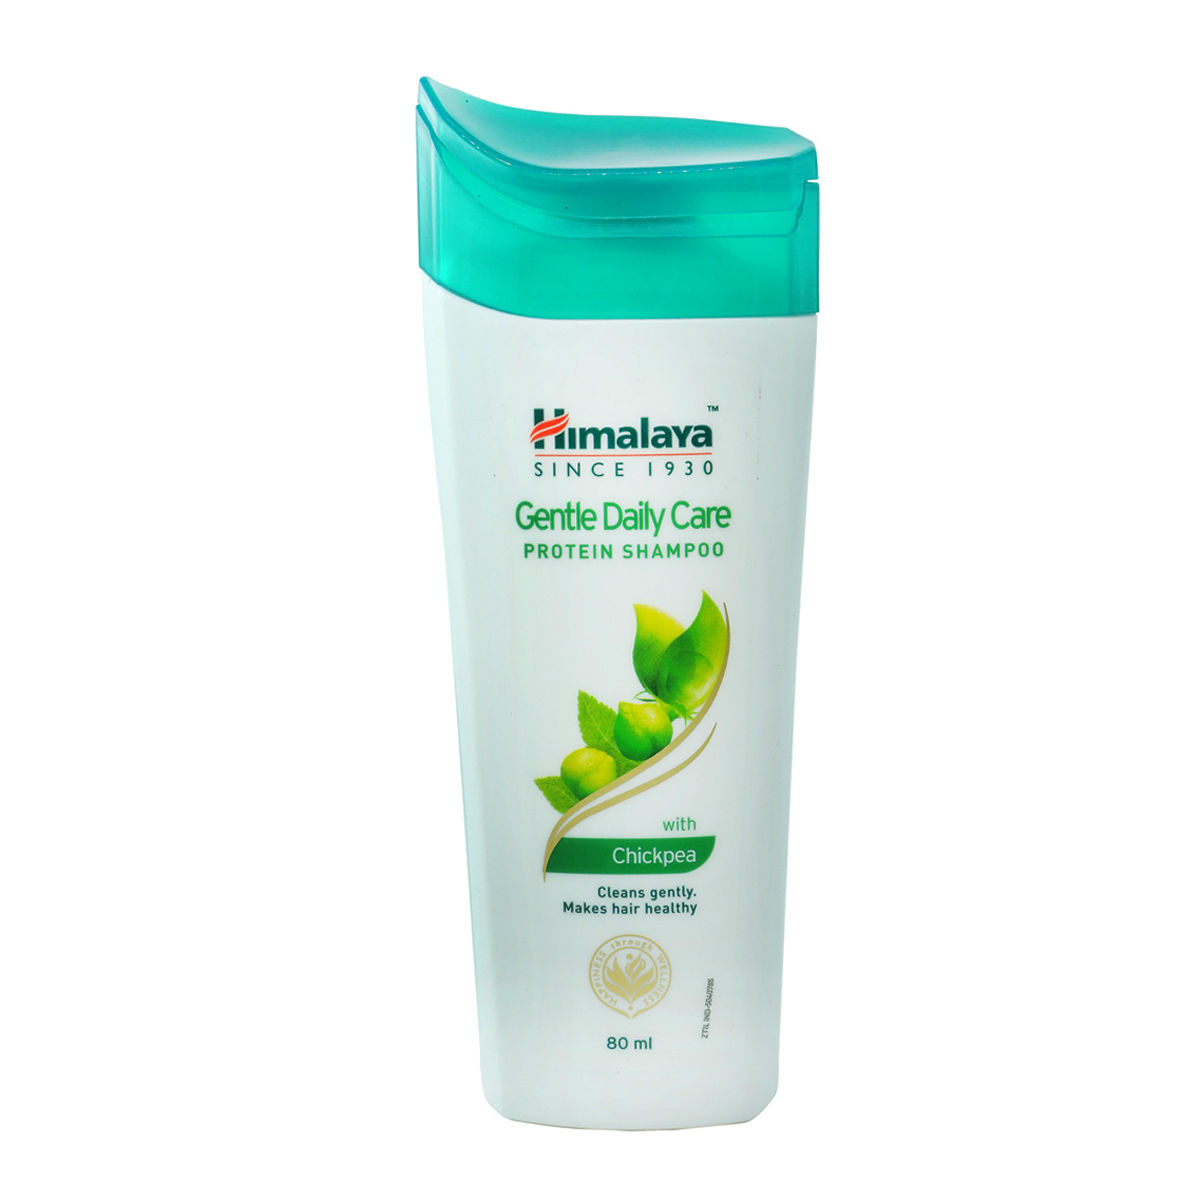 Himalaya Gentle Daily Care Protein Shampoo, ml Price, Uses, Side Composition - Apollo